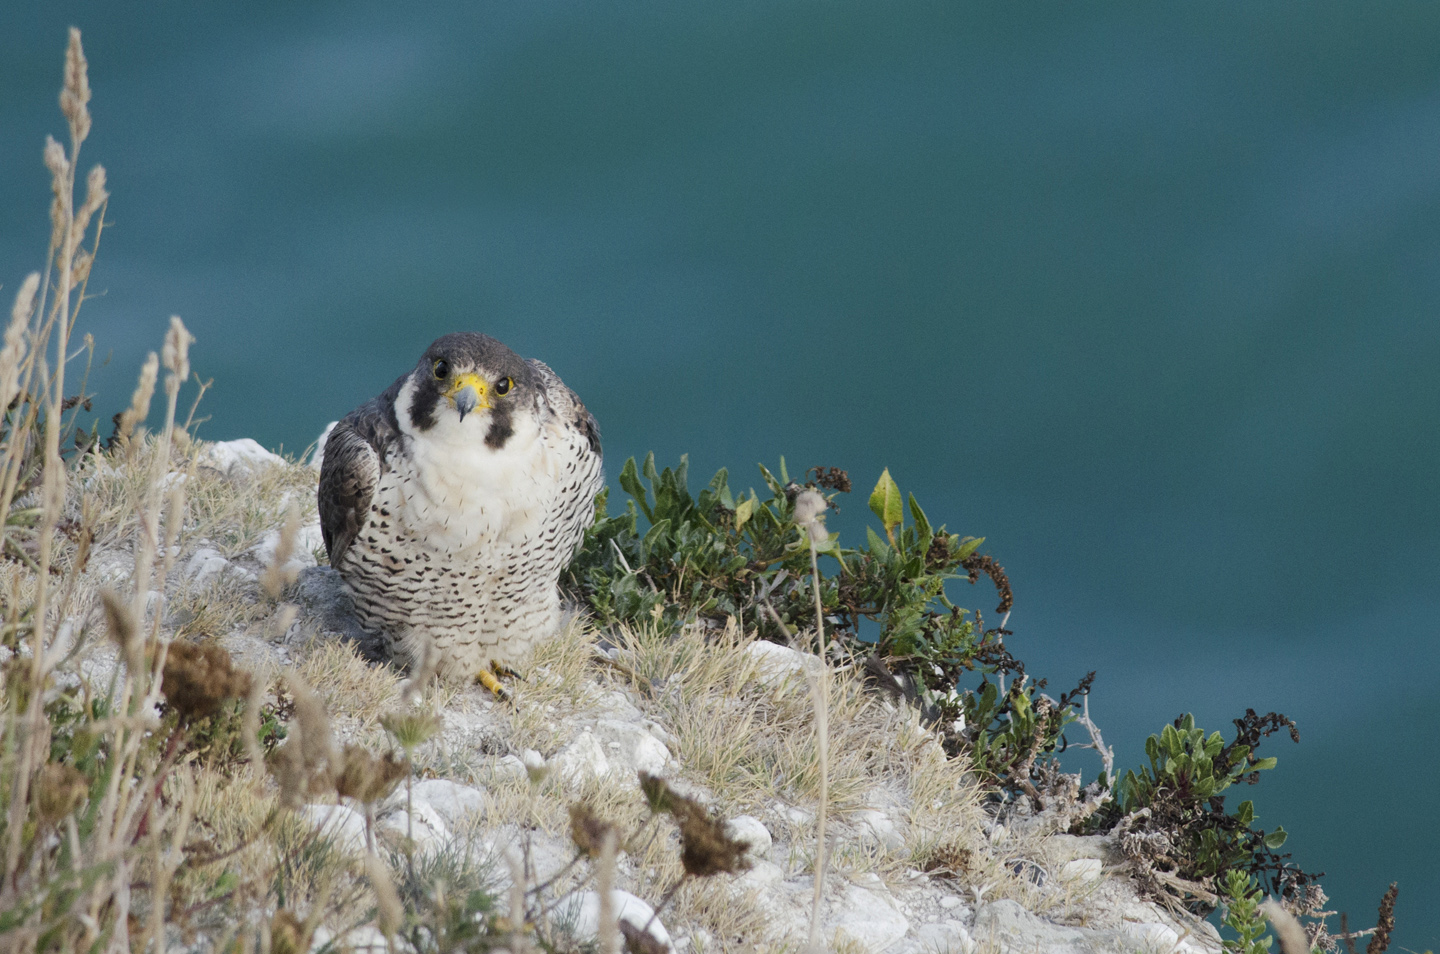  Coastal peregrines will often stay close to busy sea-ports like this one on the white cliffs near Dover, ostensibly for the pigeons, but perhaps more likely for the added light to hunt nocturnally 